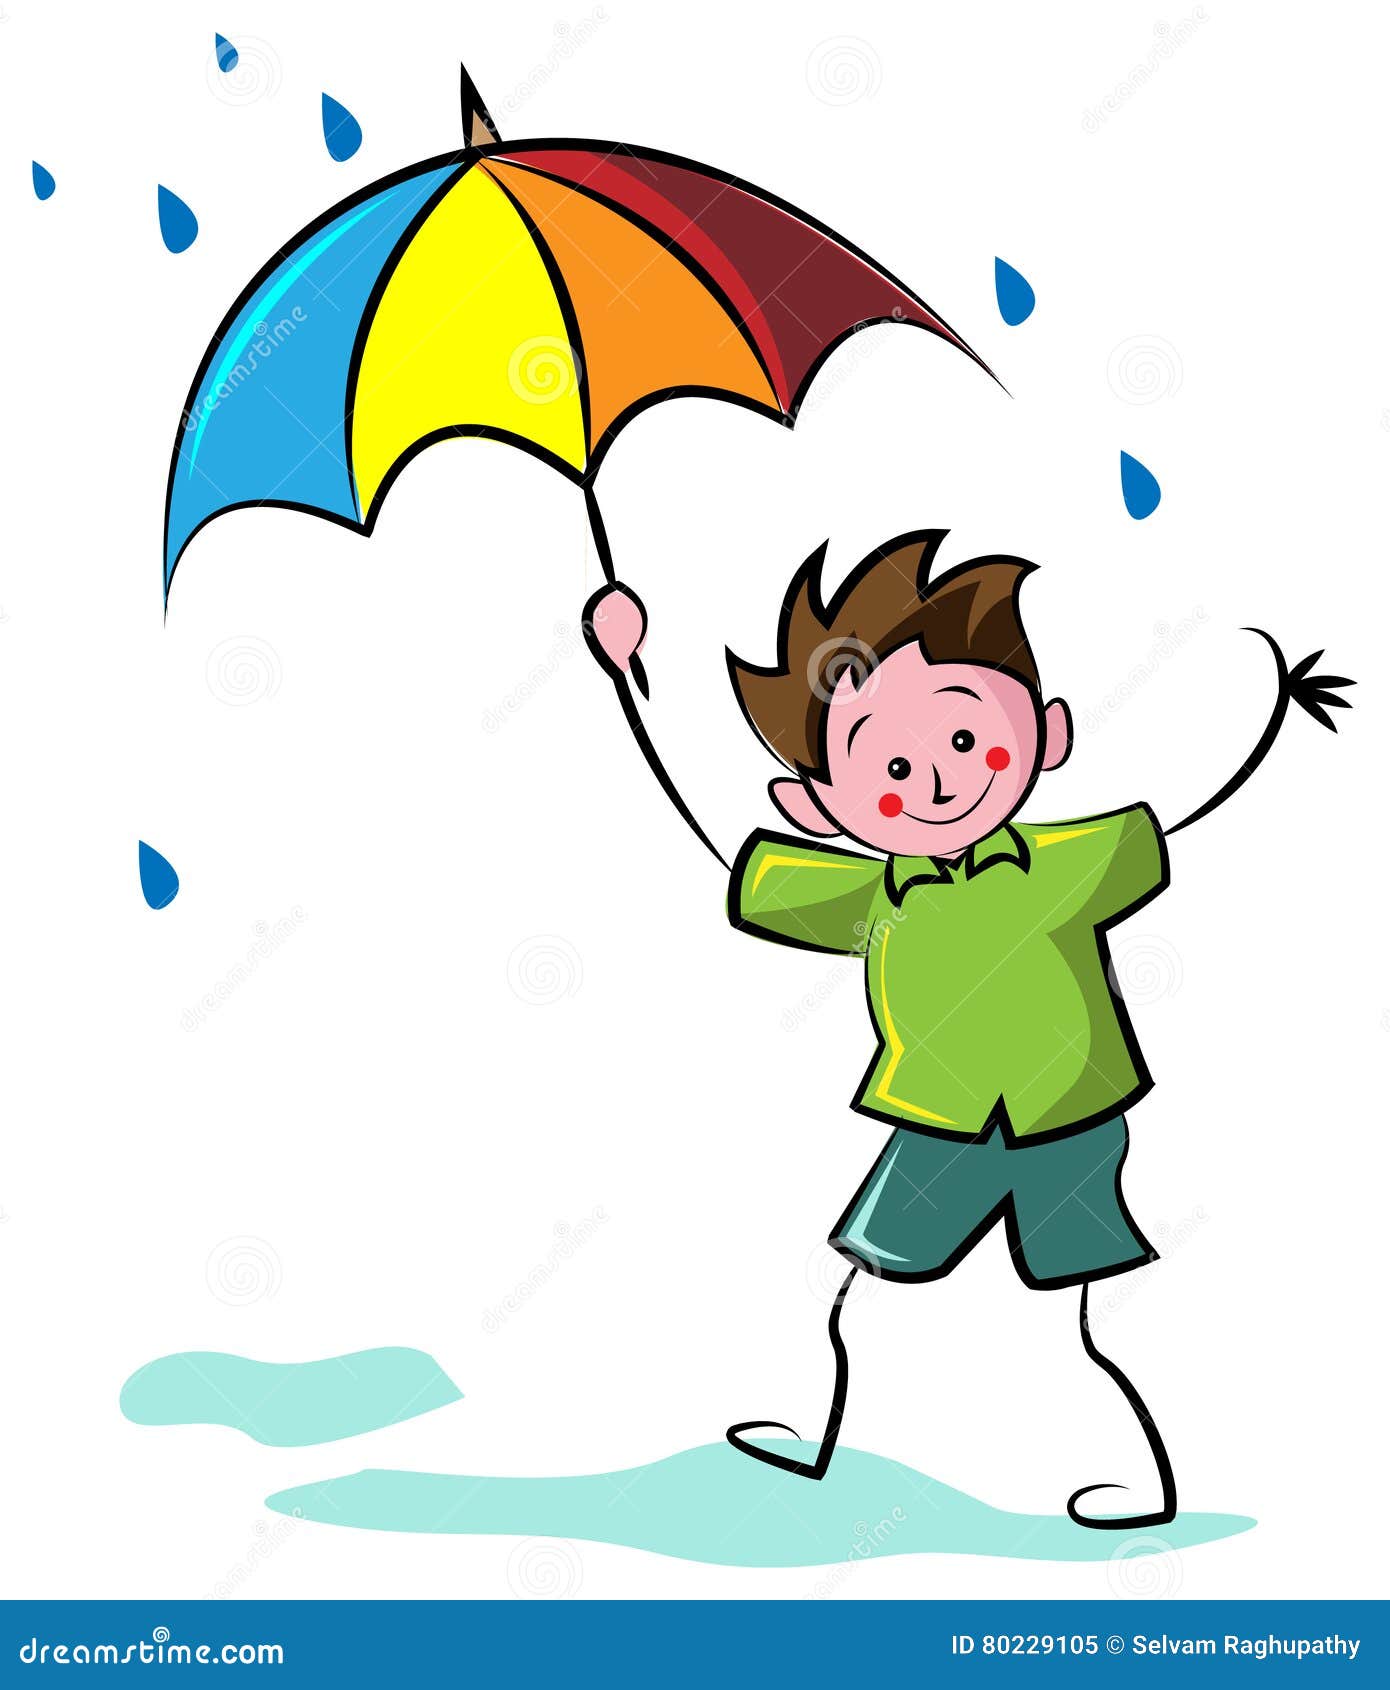 Happy Boy With Umbrella Stock Vector Illustration Of Colorful 80229105